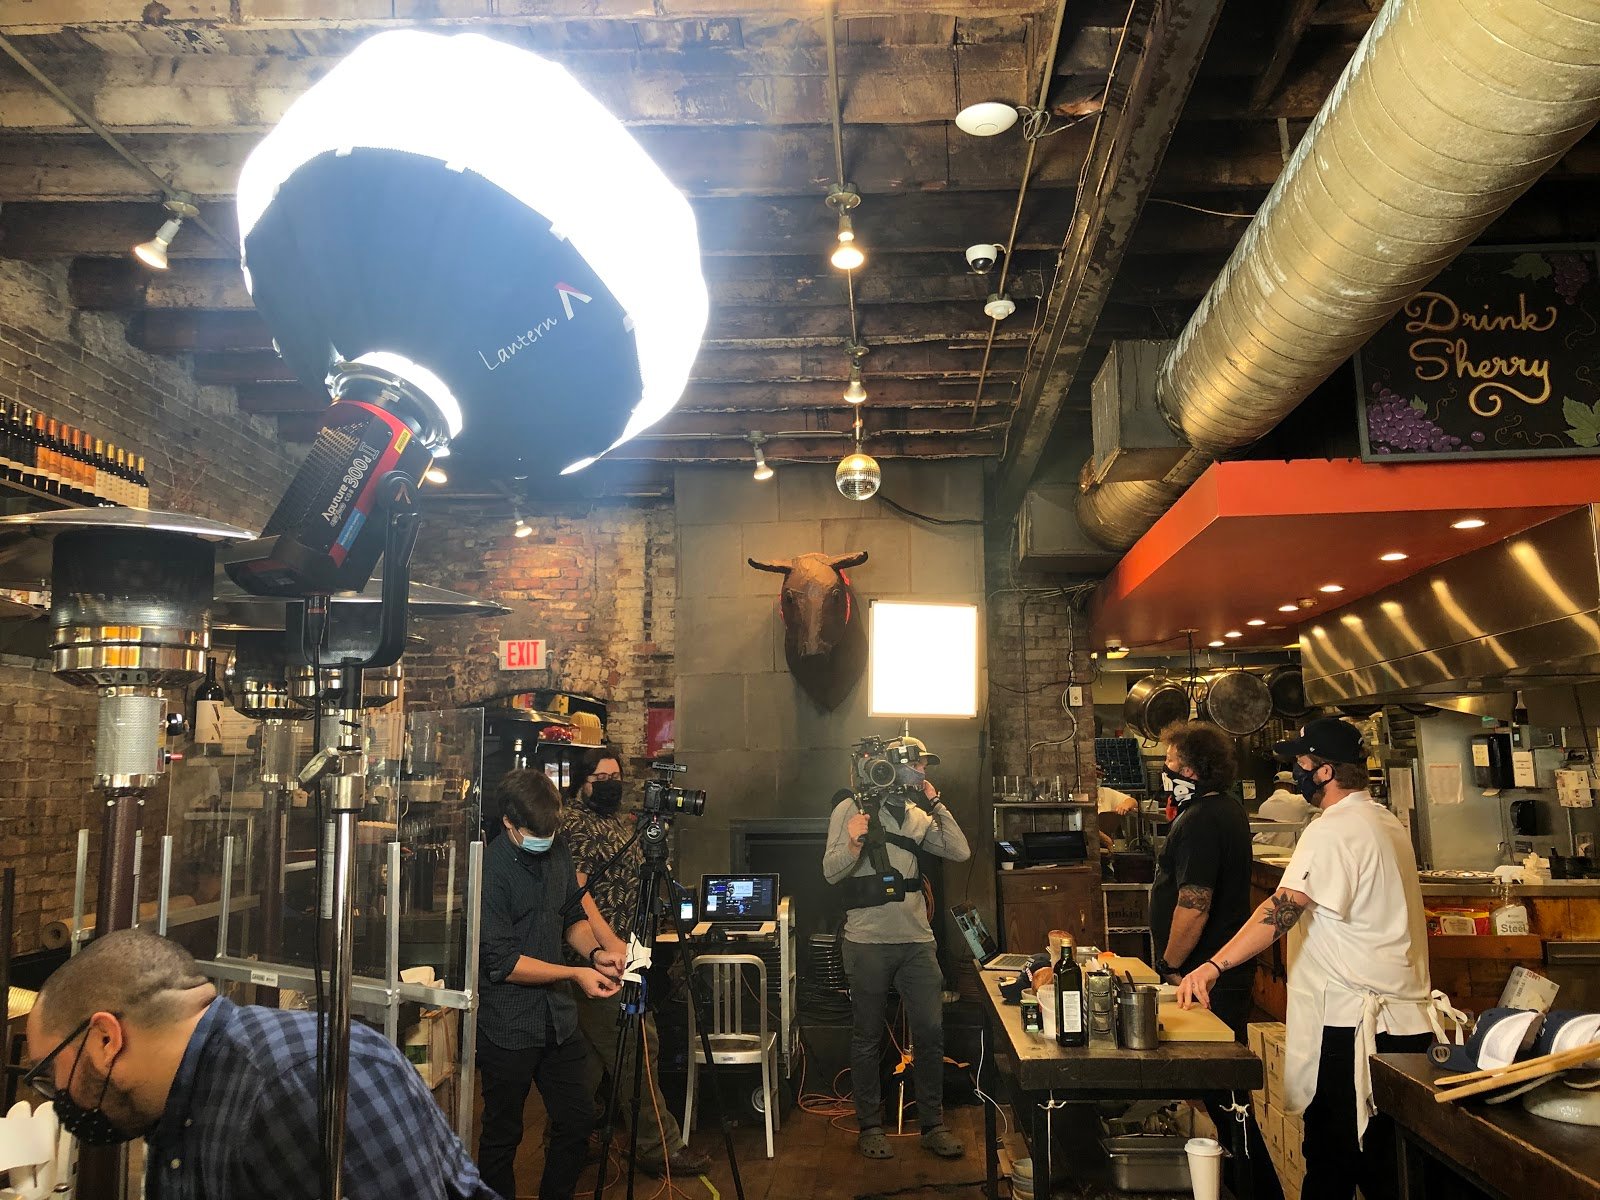 Adapting to the constraints of the small restaurant venue and social distancing, Bottle Tree Pictures chose Dejero EnGo to significantly reduce its footprint for this livestream production